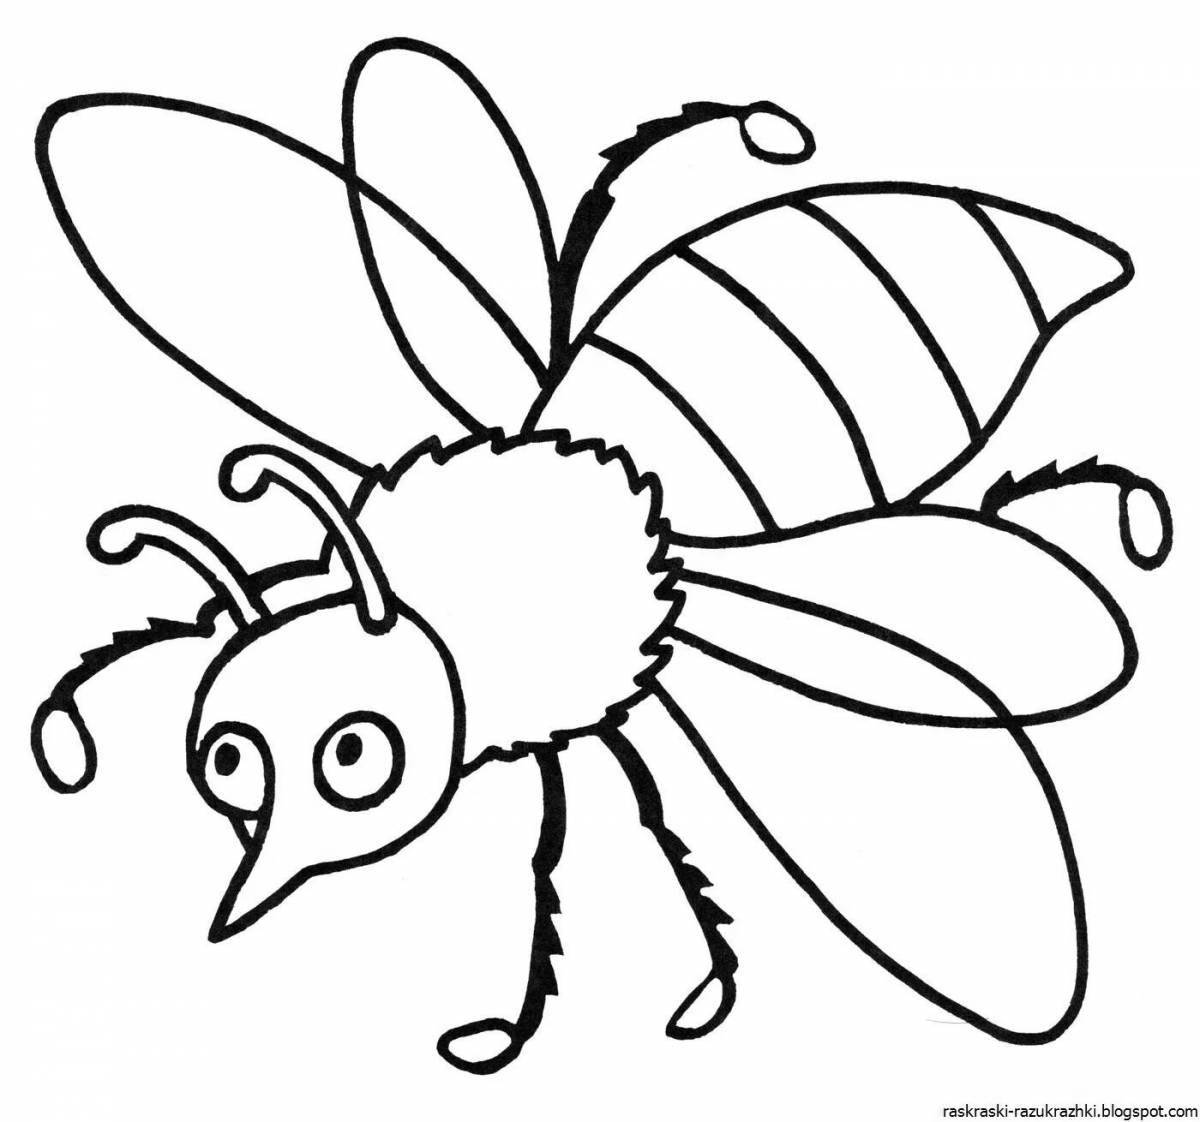 Fabulous coloring pages of insects for children 4-5 years old